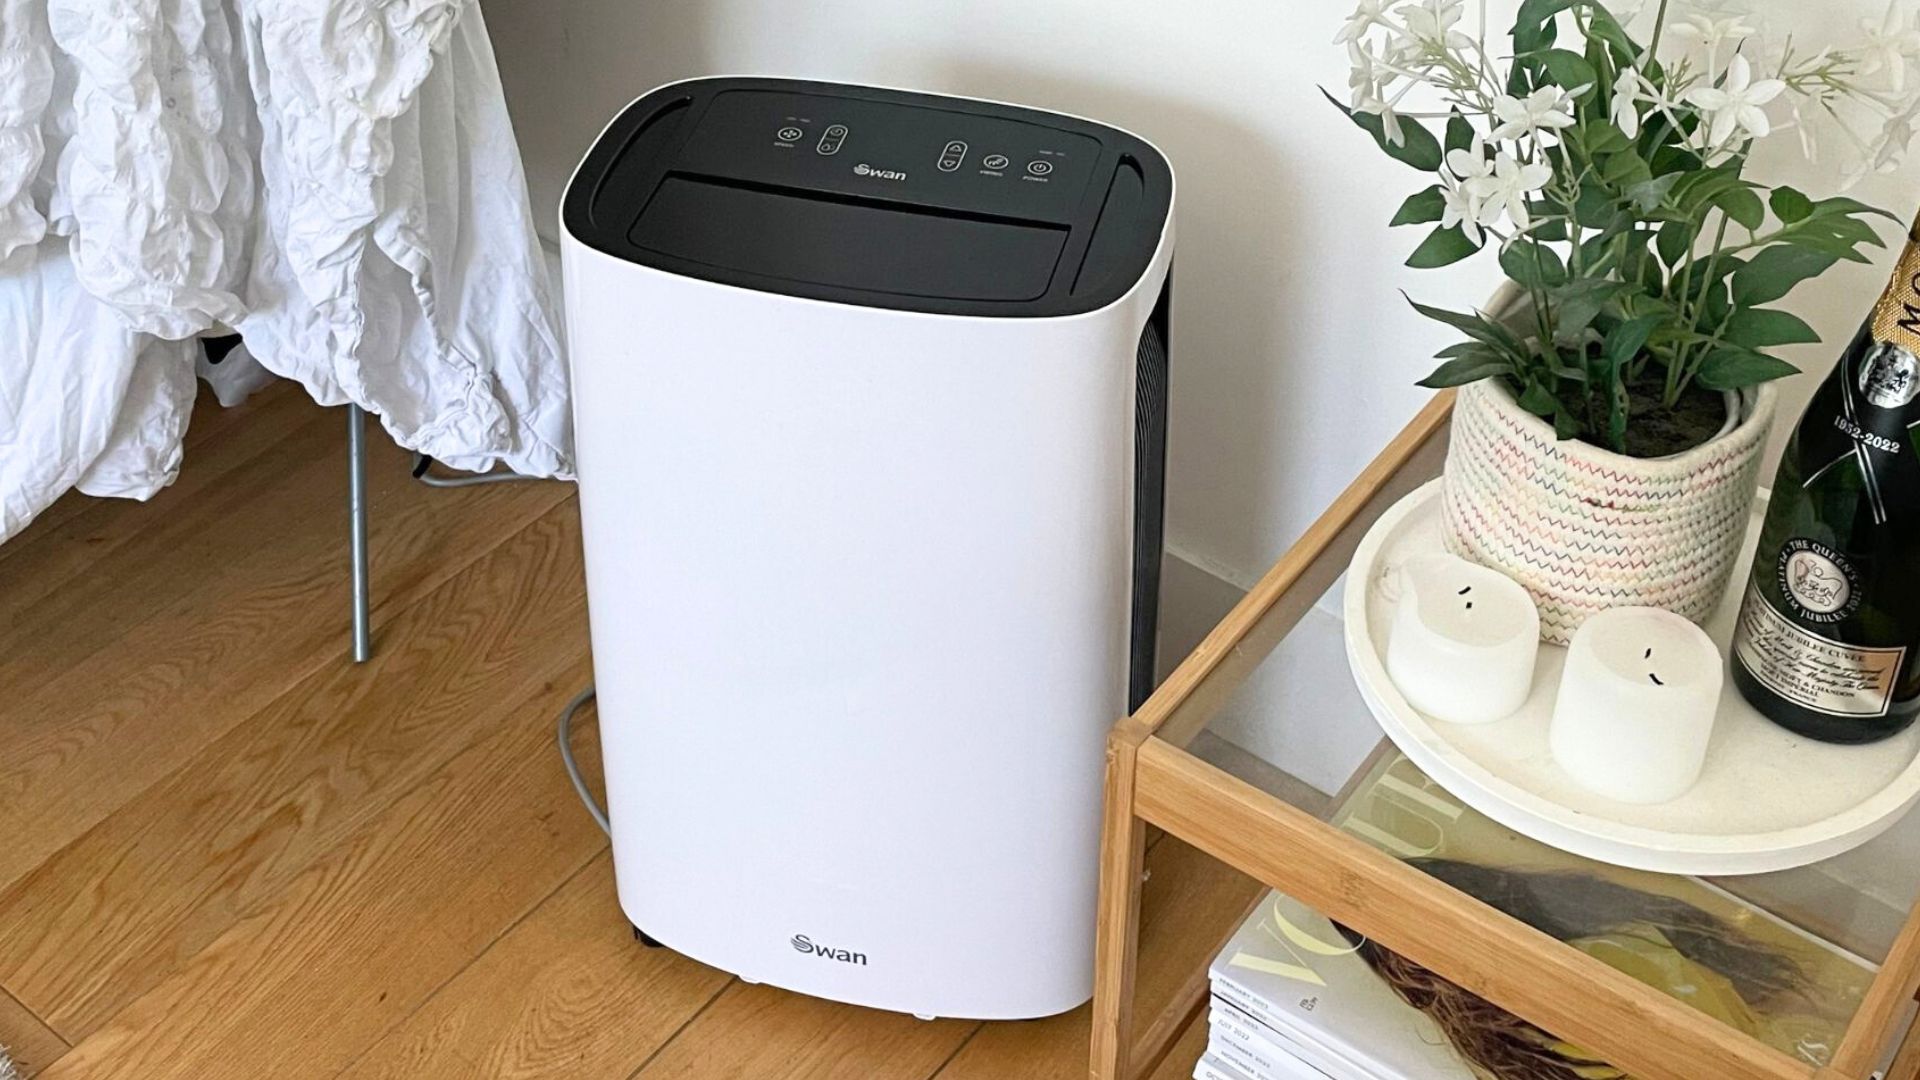 picture of a dehumidifier in a front room with launry and candles next to it